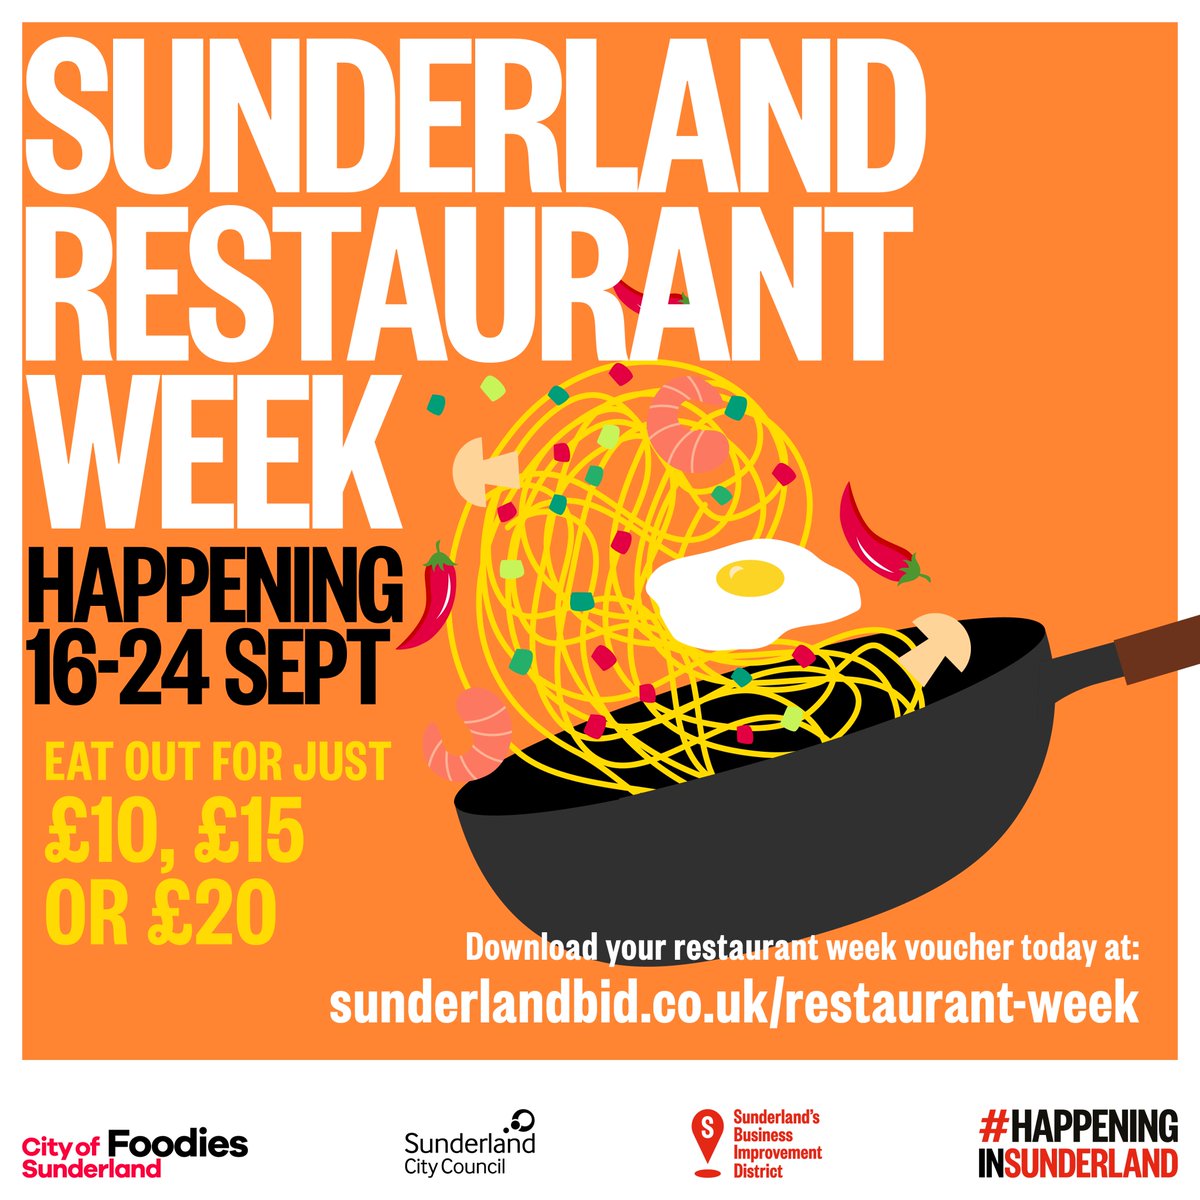 Dine across the city and uncover hidden culinary gems.  

Take this opportunity to discover the vibrant dining scene that Sunderland has to offer. 

Sunderland Restaurant Week is #HappeningInSunderland from 16 to 24 September!   
Download your voucher at bit.ly/3QGz8WC